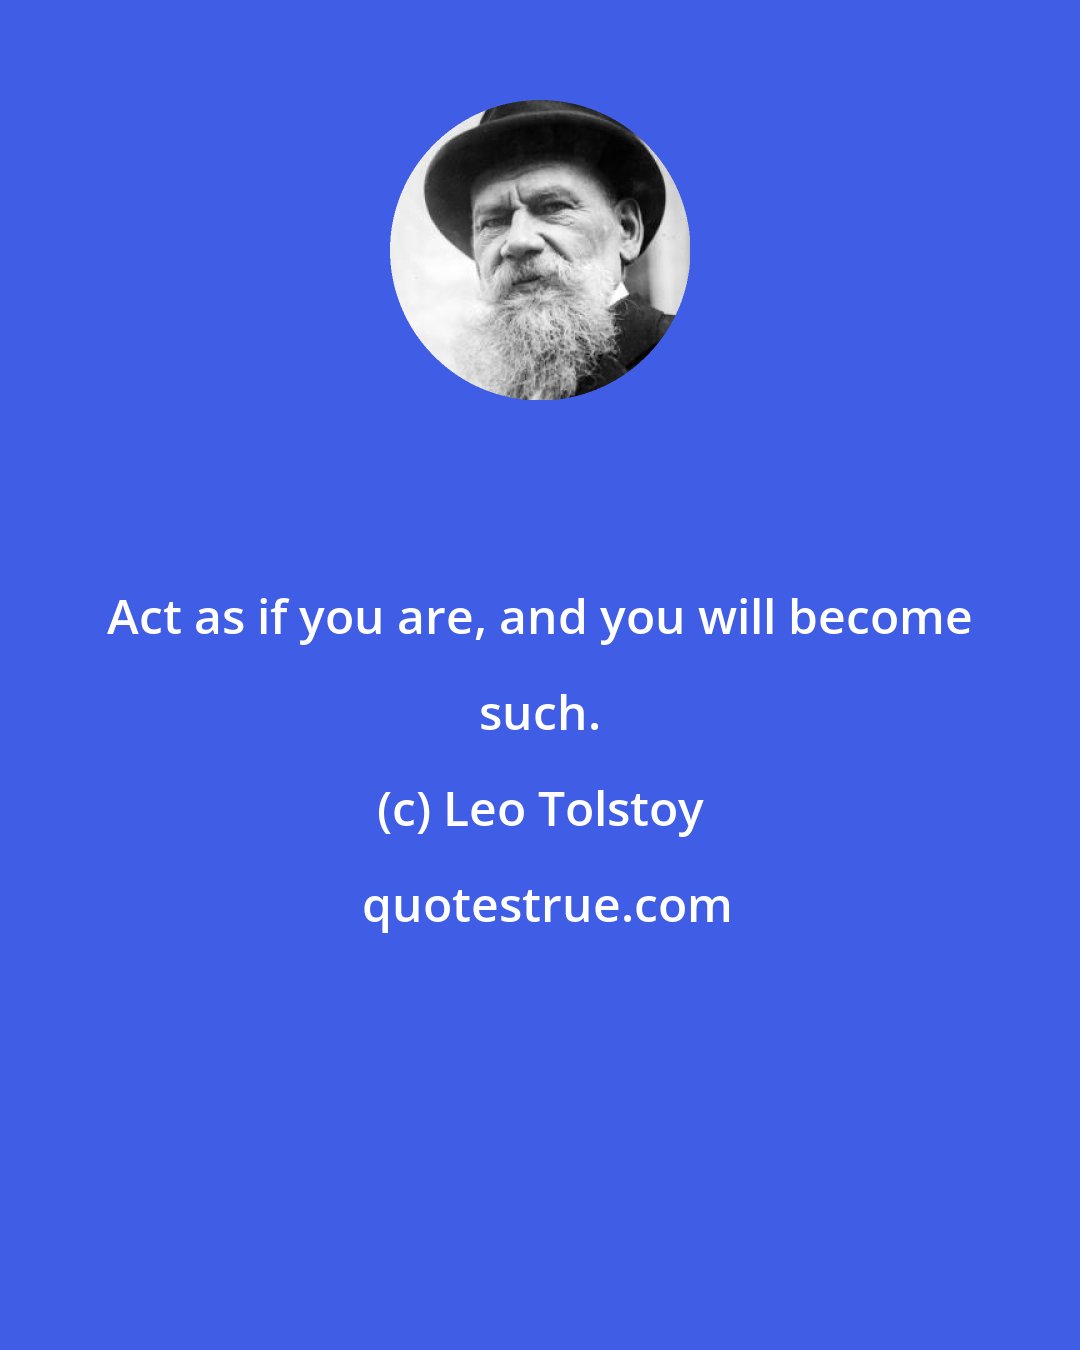 Leo Tolstoy: Act as if you are, and you will become such.